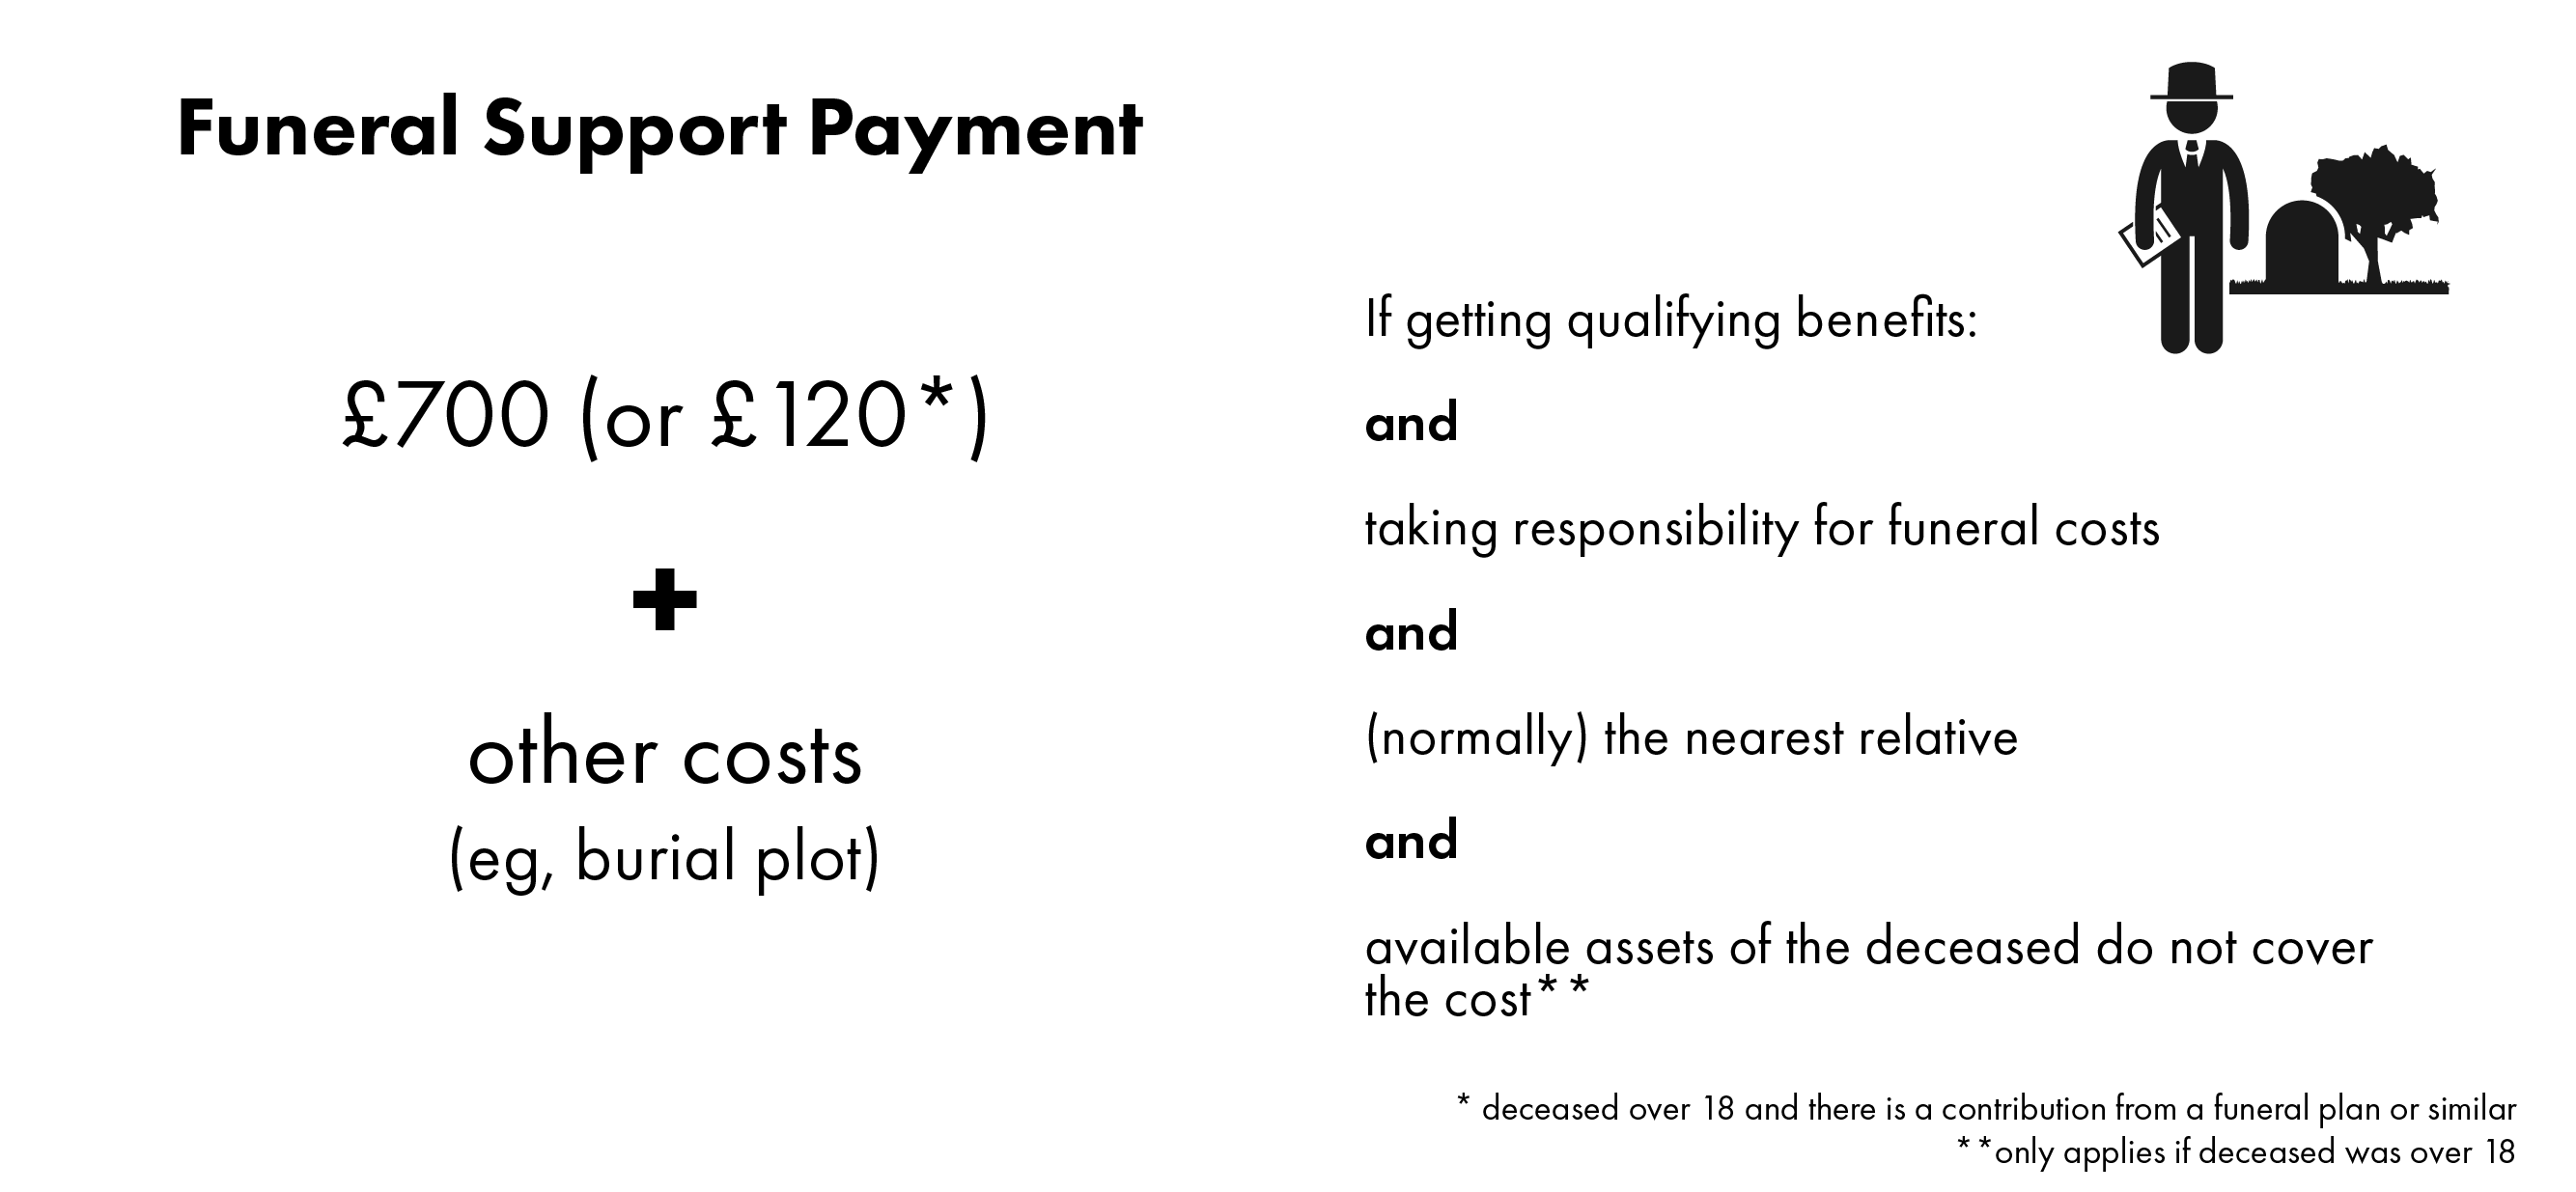 funeral support payment of £700 (or £120 if deceased has assets) and certain other costs towards the cost of a funeral.  Avaiable if getting qualifying benefits, taking responsibility for funeral costs, are the nearest relative and avaible assets of deceased do not cover the costs.